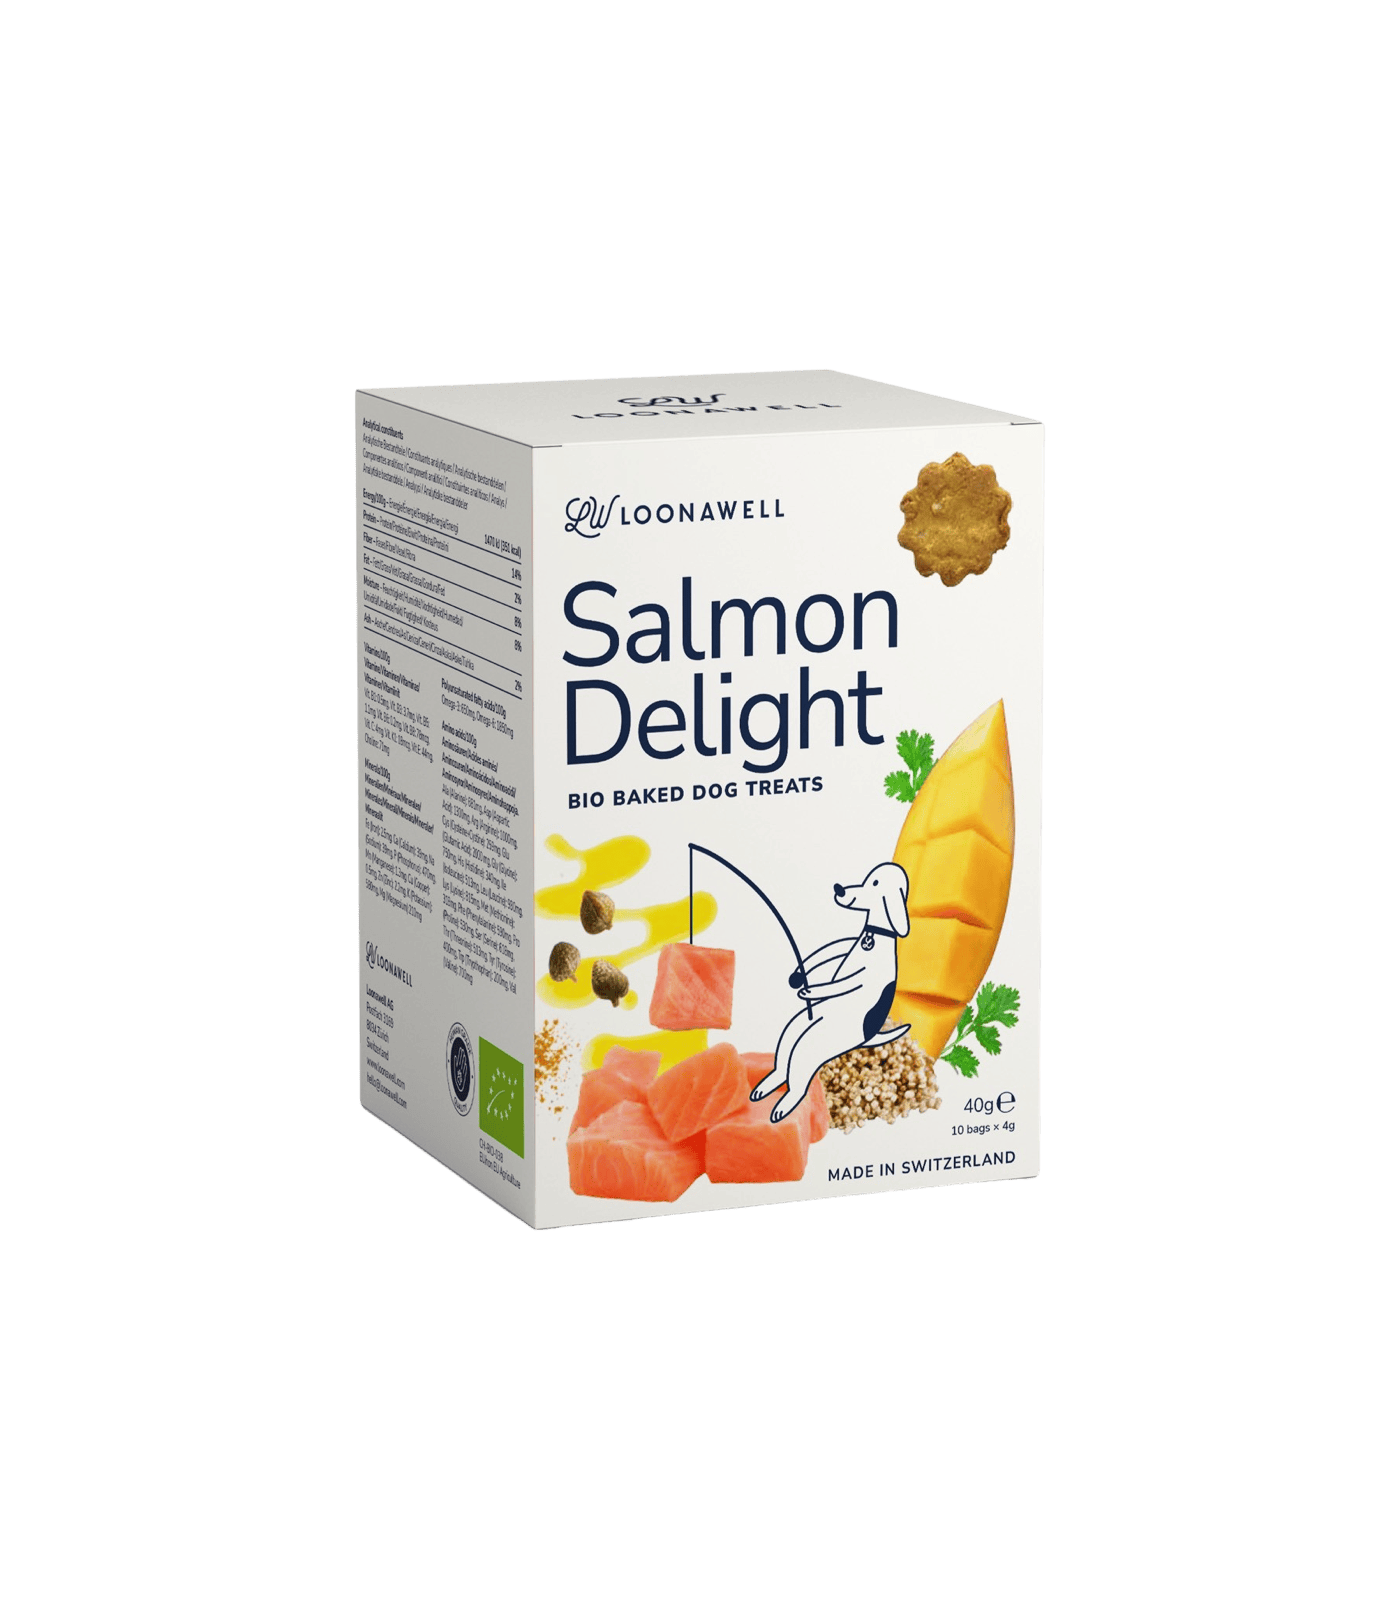  LOONAWELL's Salmon Delight organic treats for dogs with sensitive skin. All natural treats made in Switzerland. Organic treats by LOONAWELL.